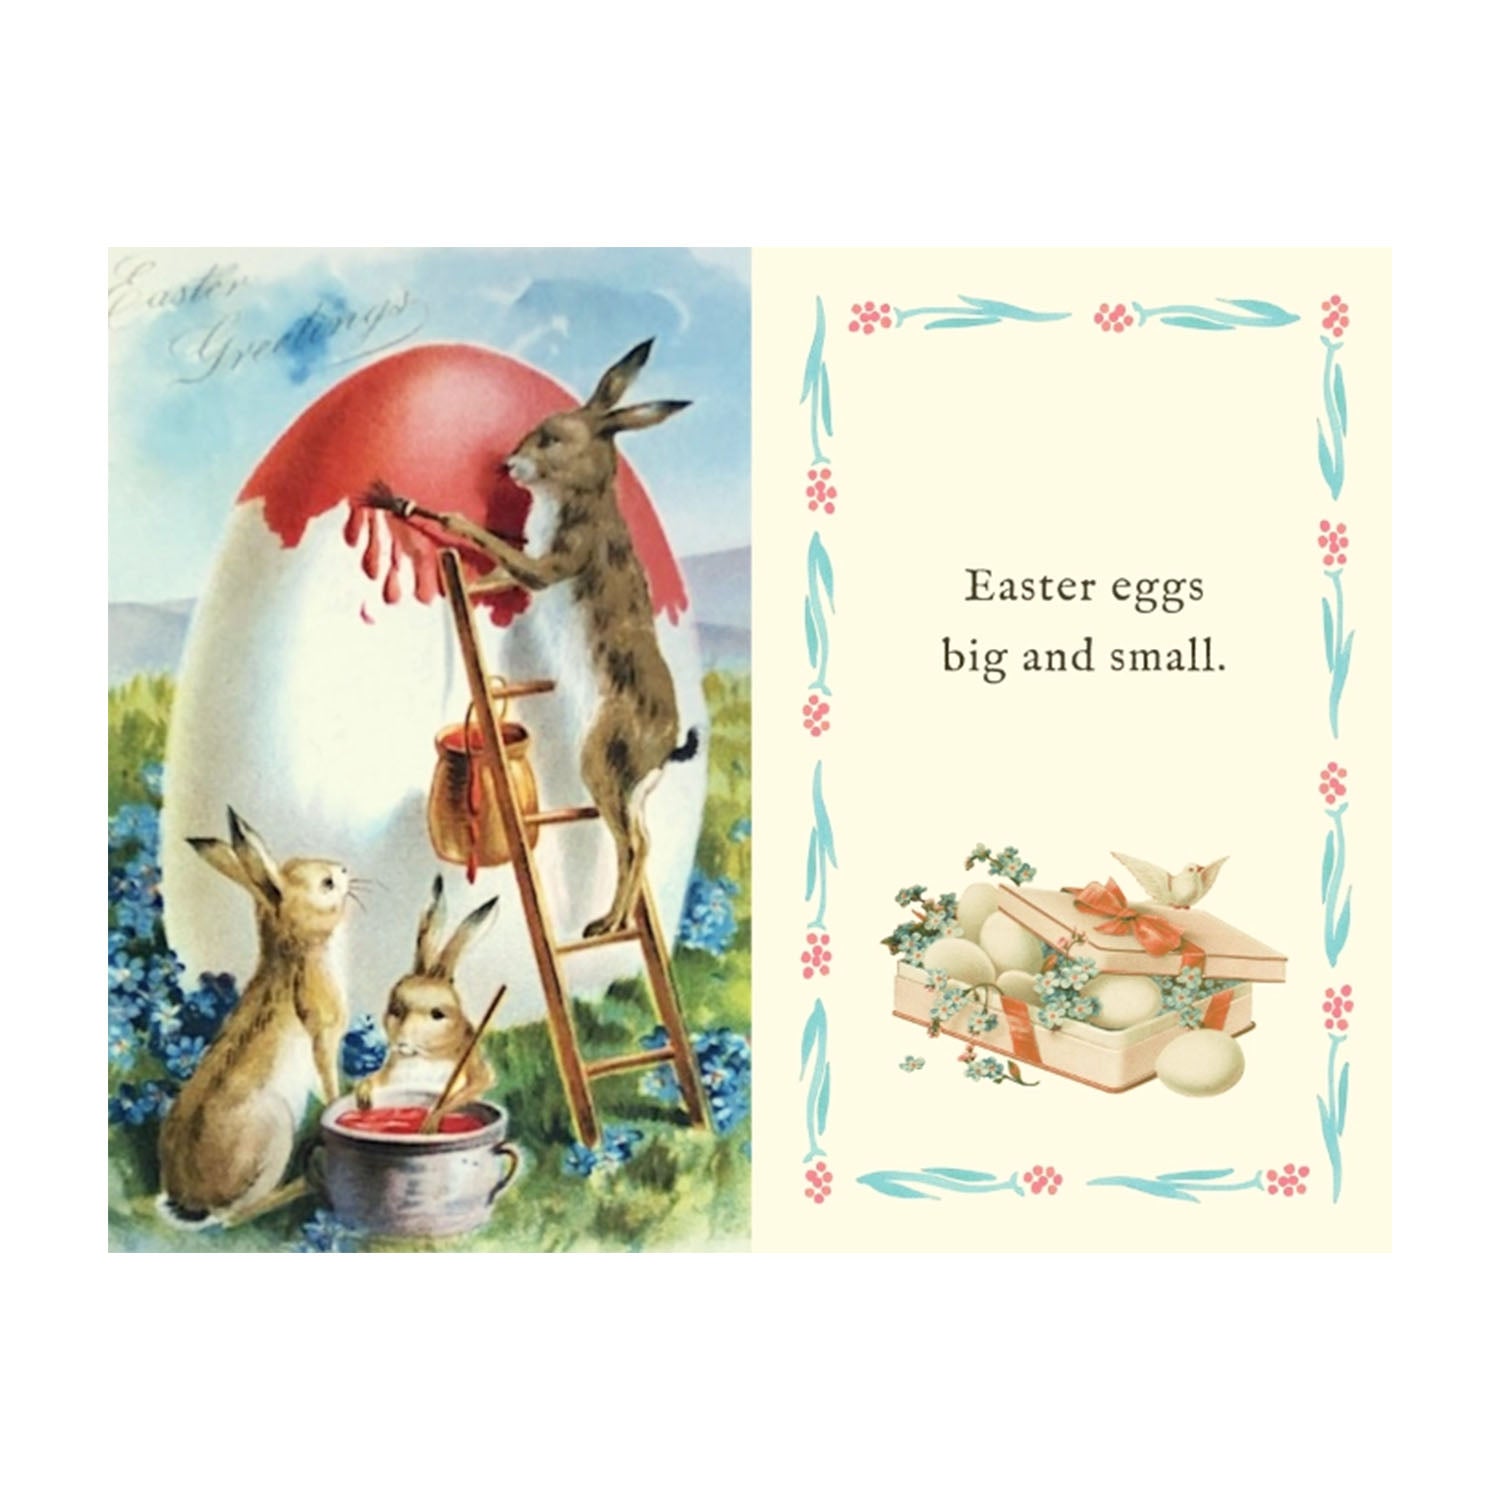 Getting Ready For Easter (Children's Board Book)